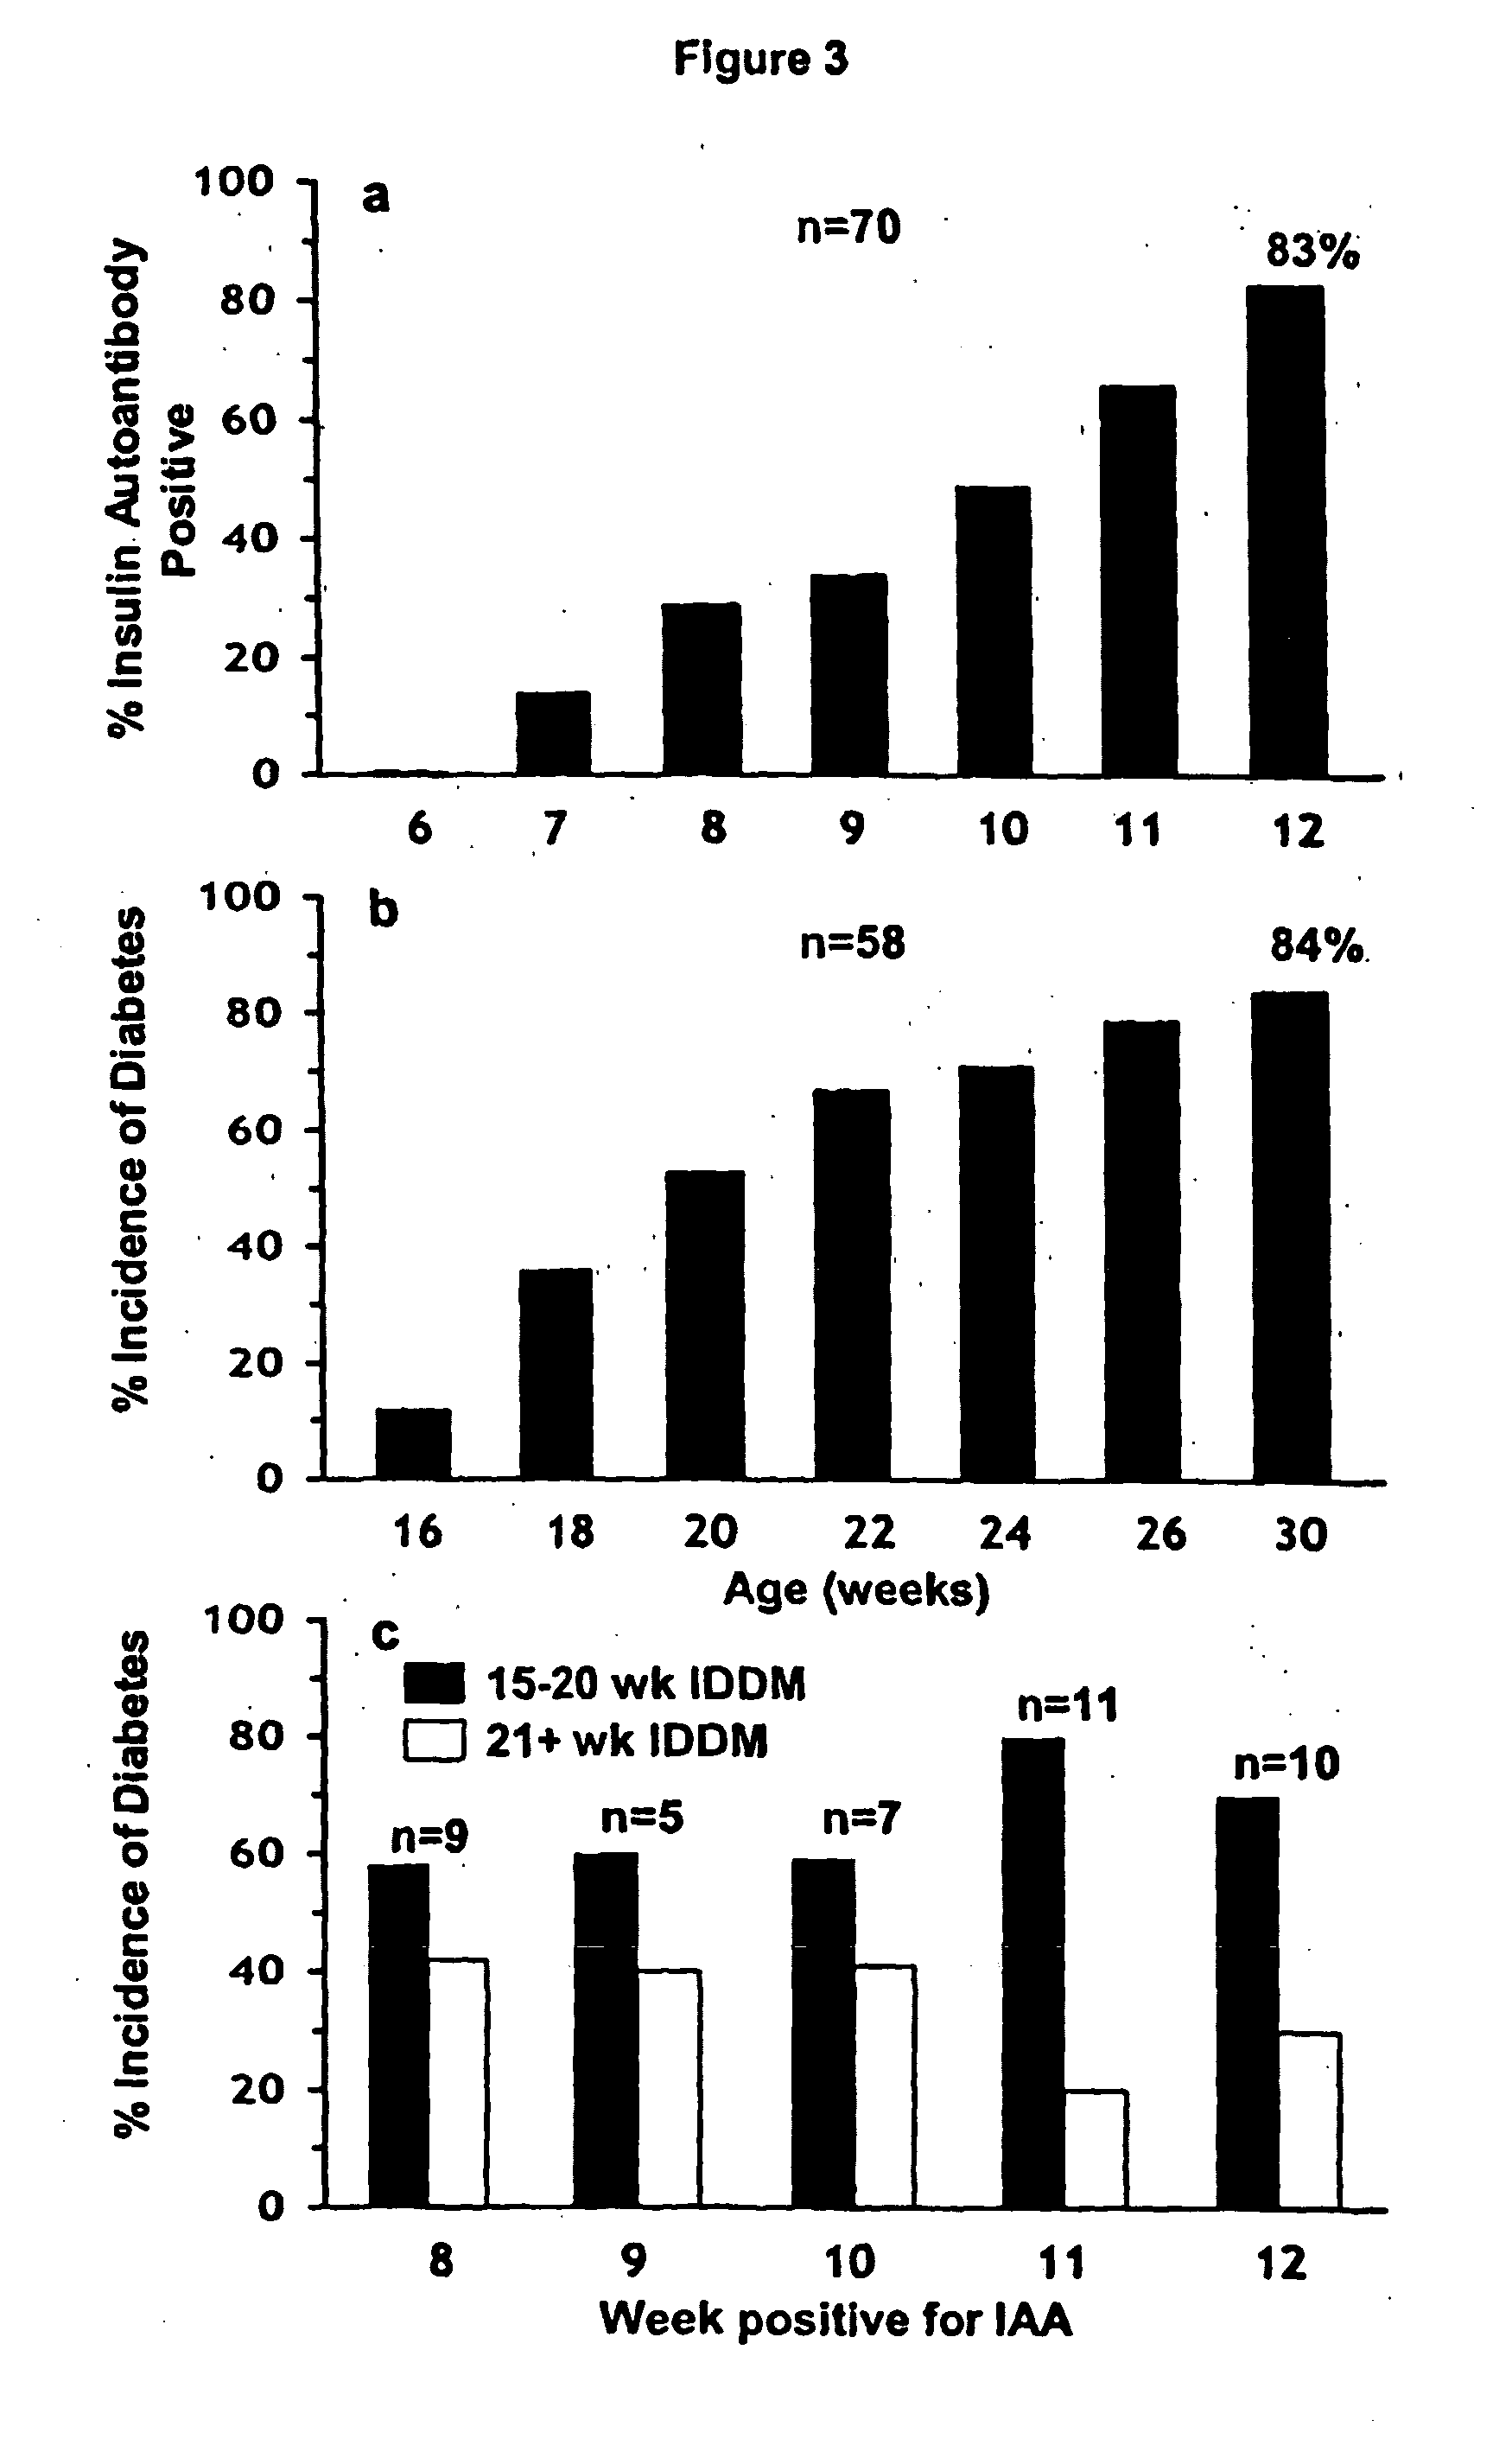 Treatment of type 1 diabetes before and after expression of predisposition markers